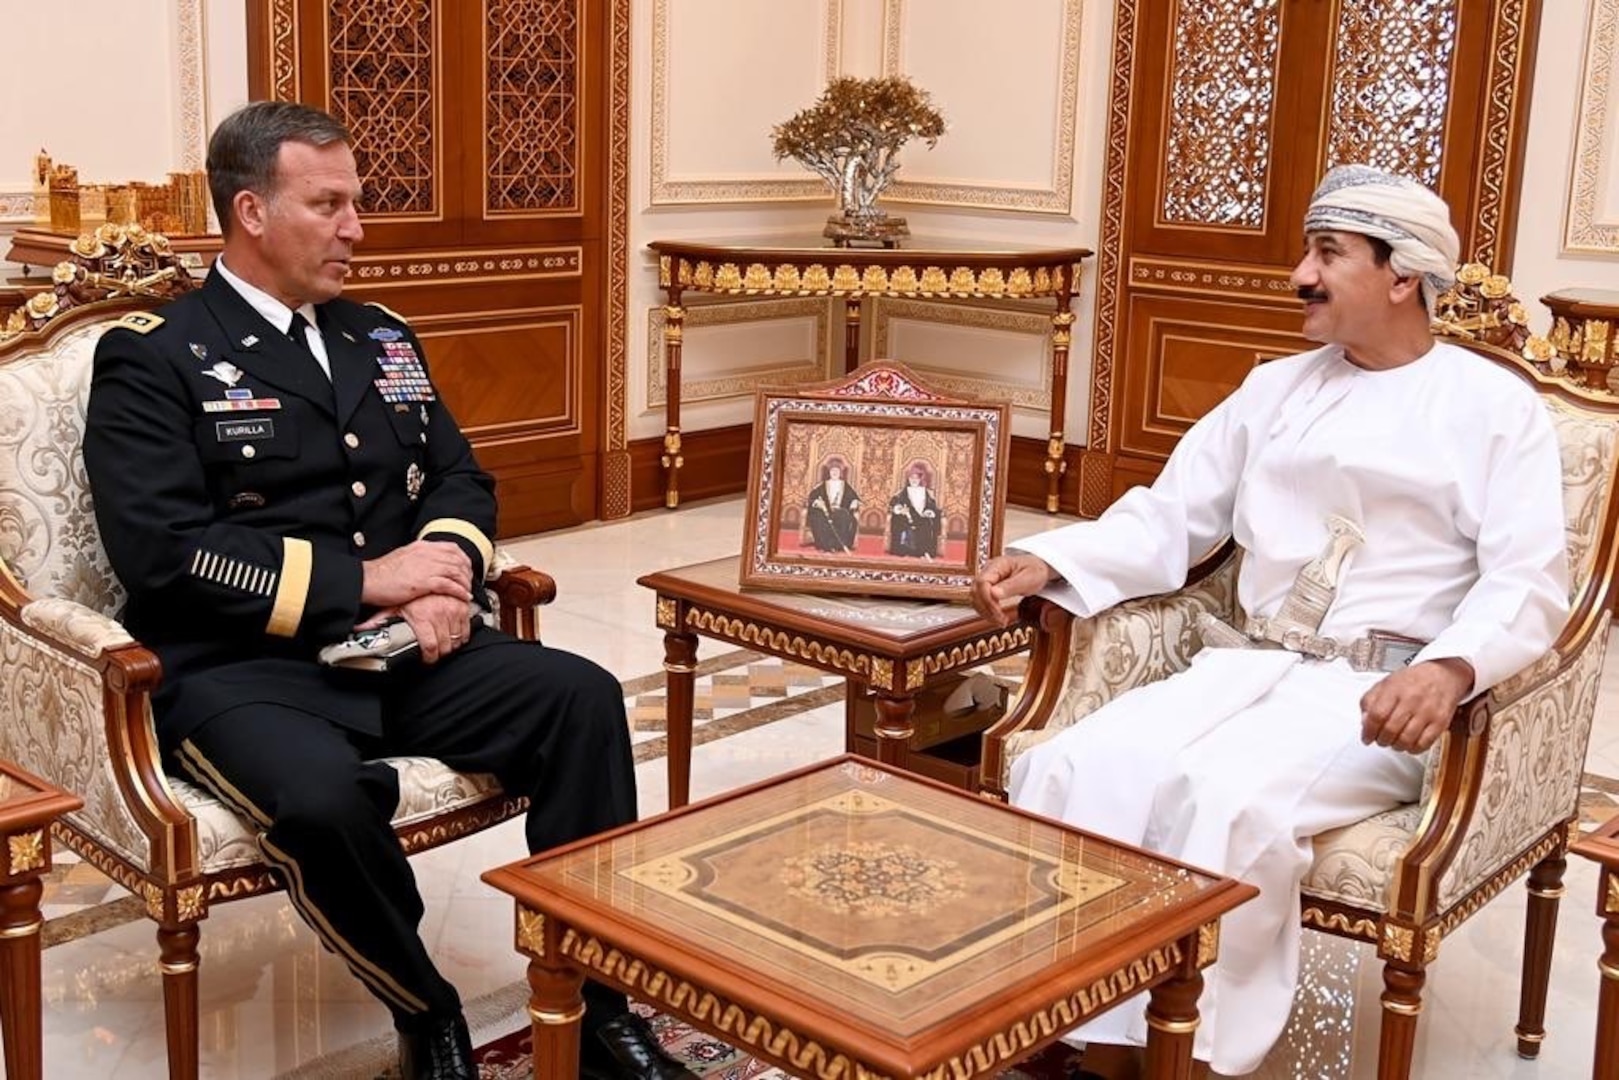 General Kurilla meets with General Sultan bin Mohammed Al-Numani, Minister of the Royal Office in the Sultanate of Oman, Muscat, Oman, June 19, 2022